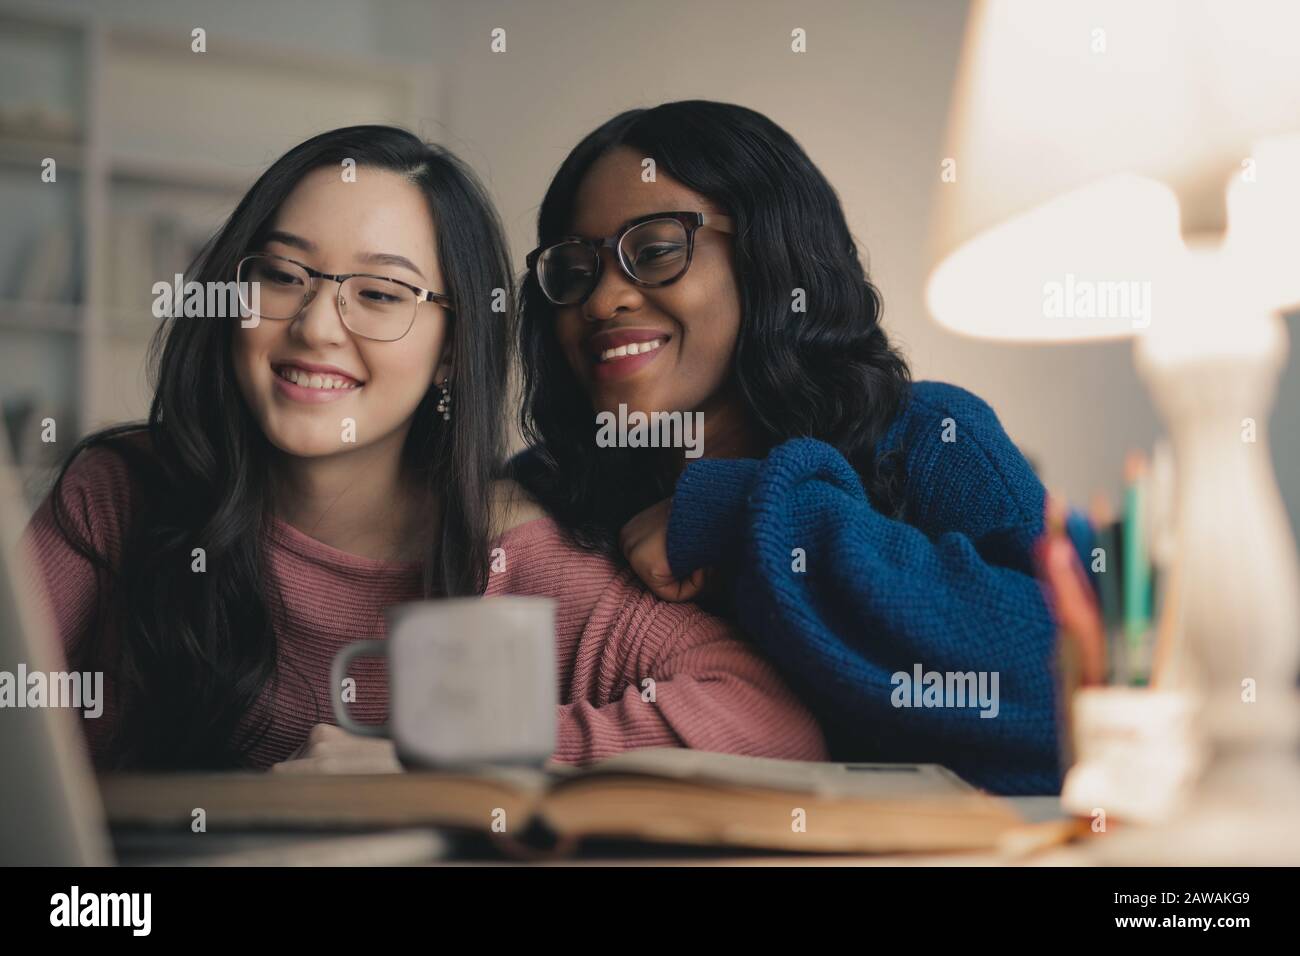 two women laugh looking at the laptop Stock Photo